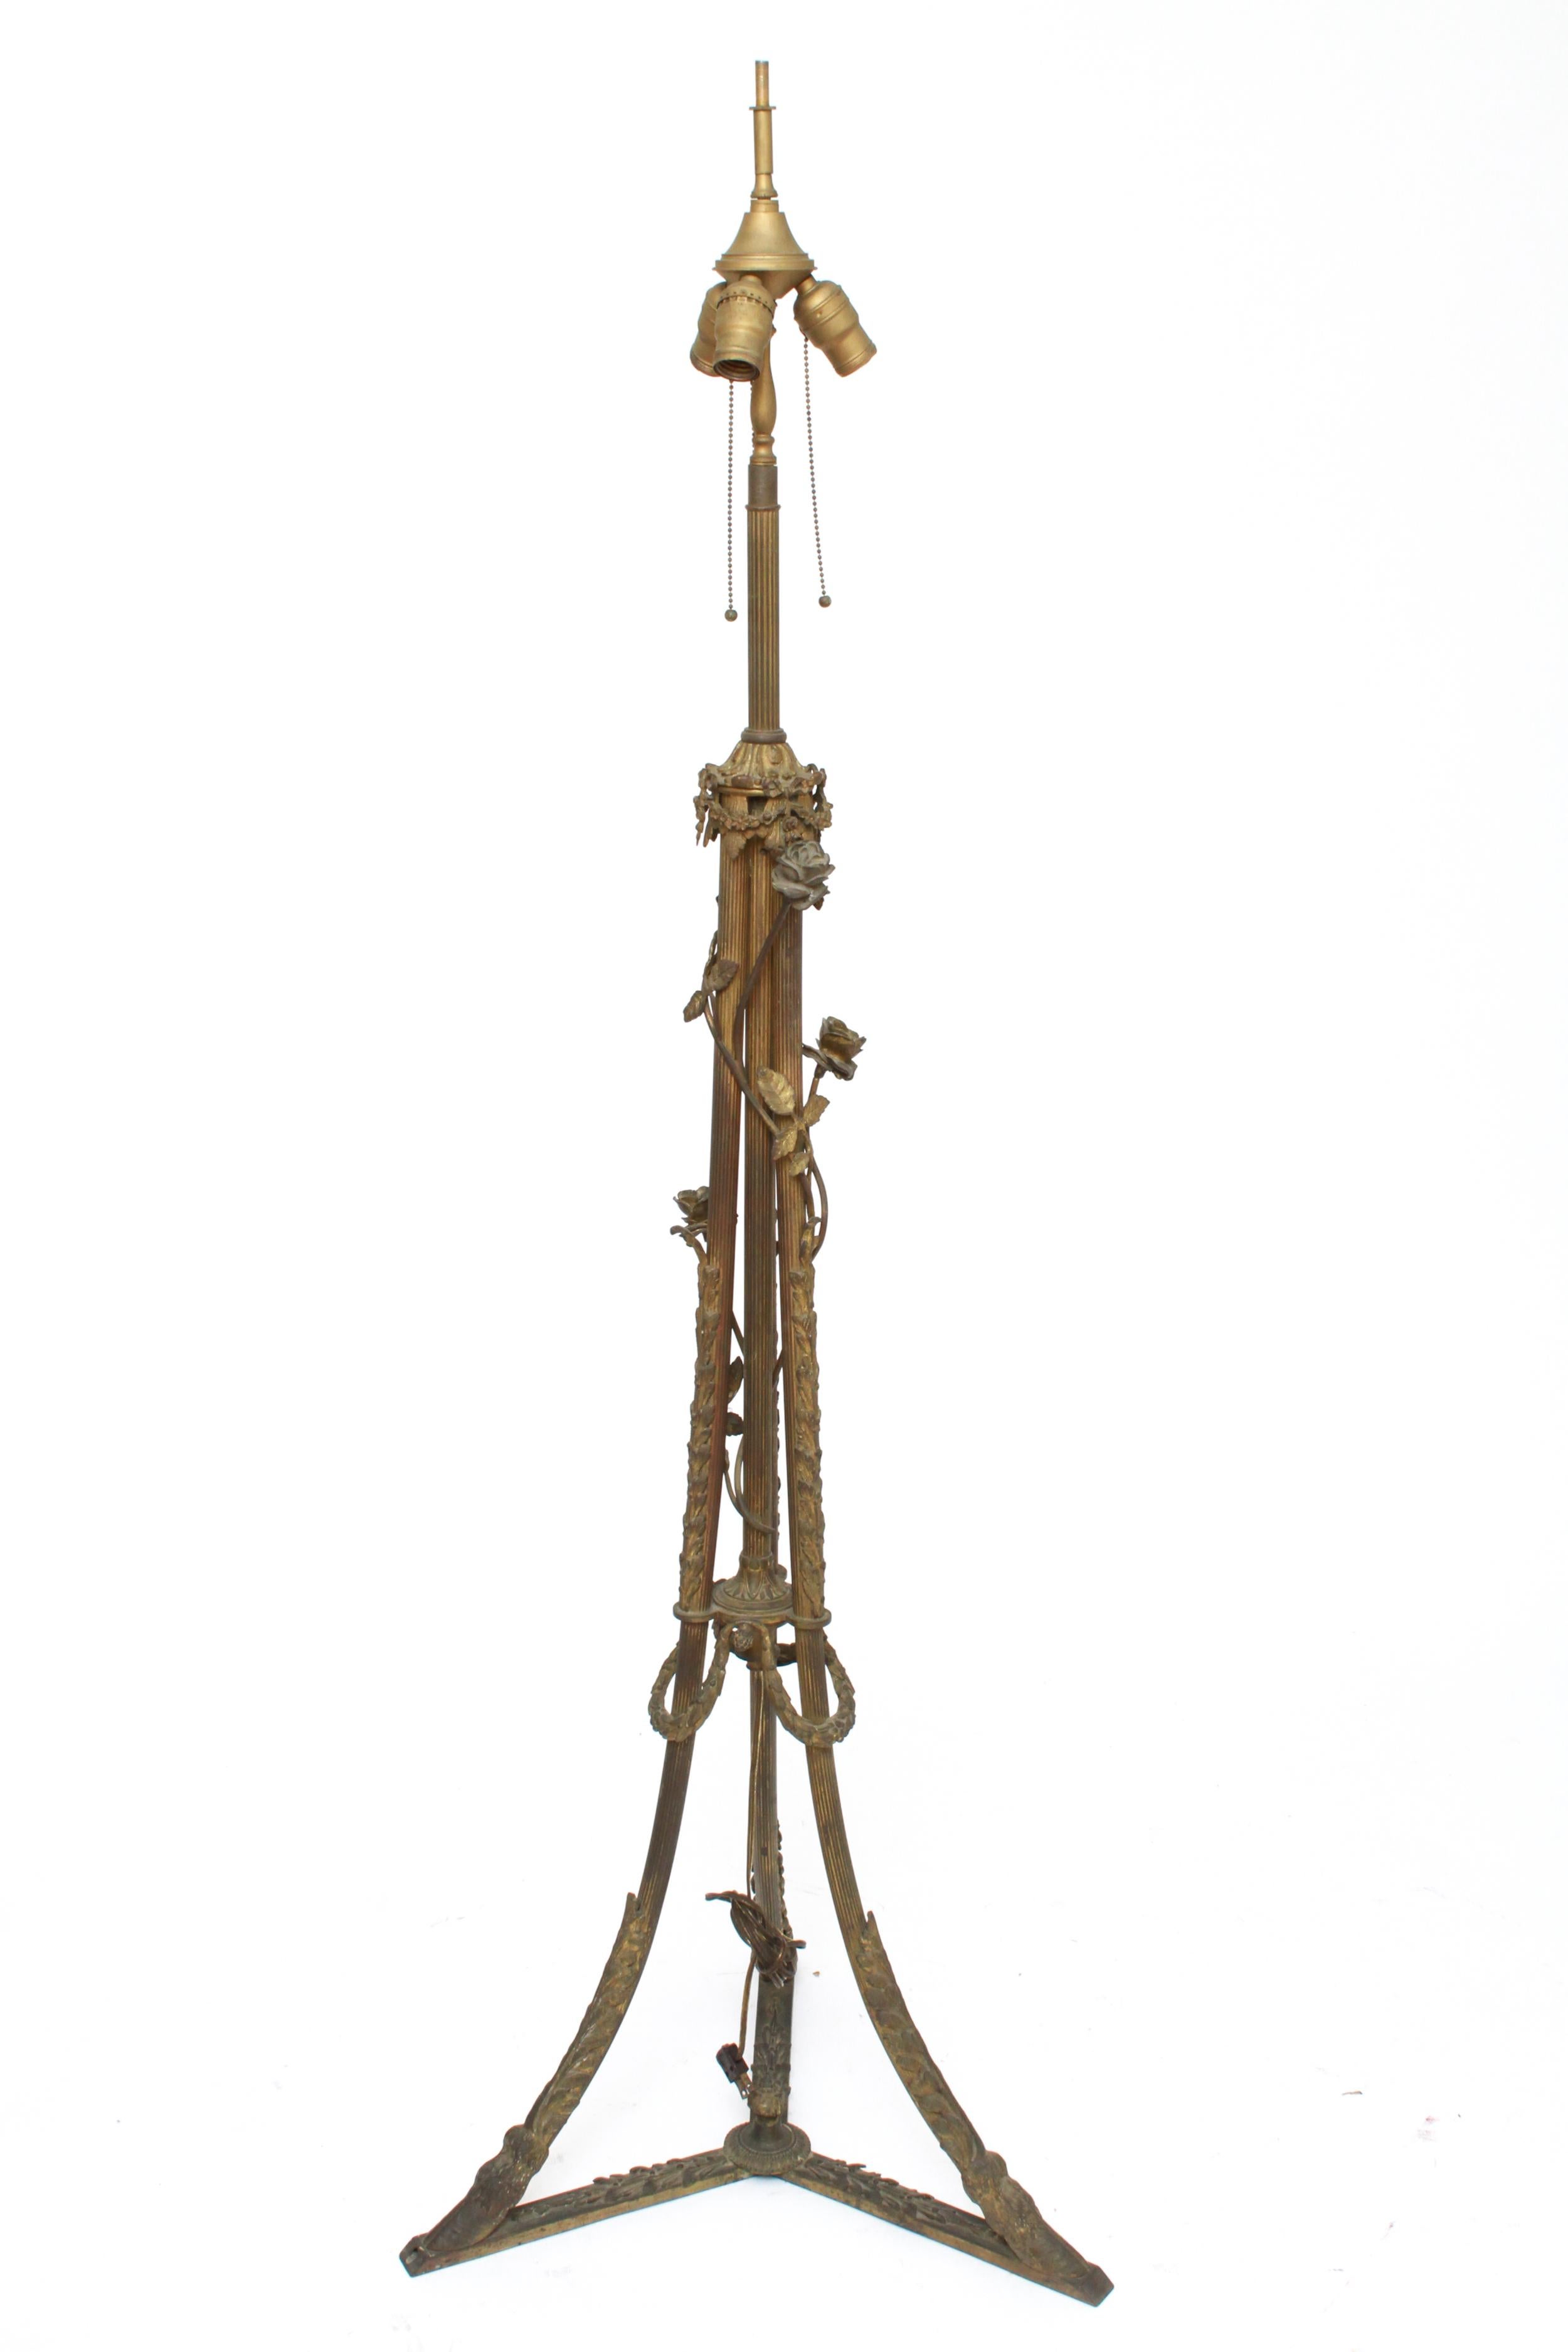 American Art Nouveau Tiffany style slag or marble glass floor lamp with a shade decorated with a floral motif atop a Neoclassical manner tripod base with floral and vine motif and hoof feet. The piece is in great vintage condition with